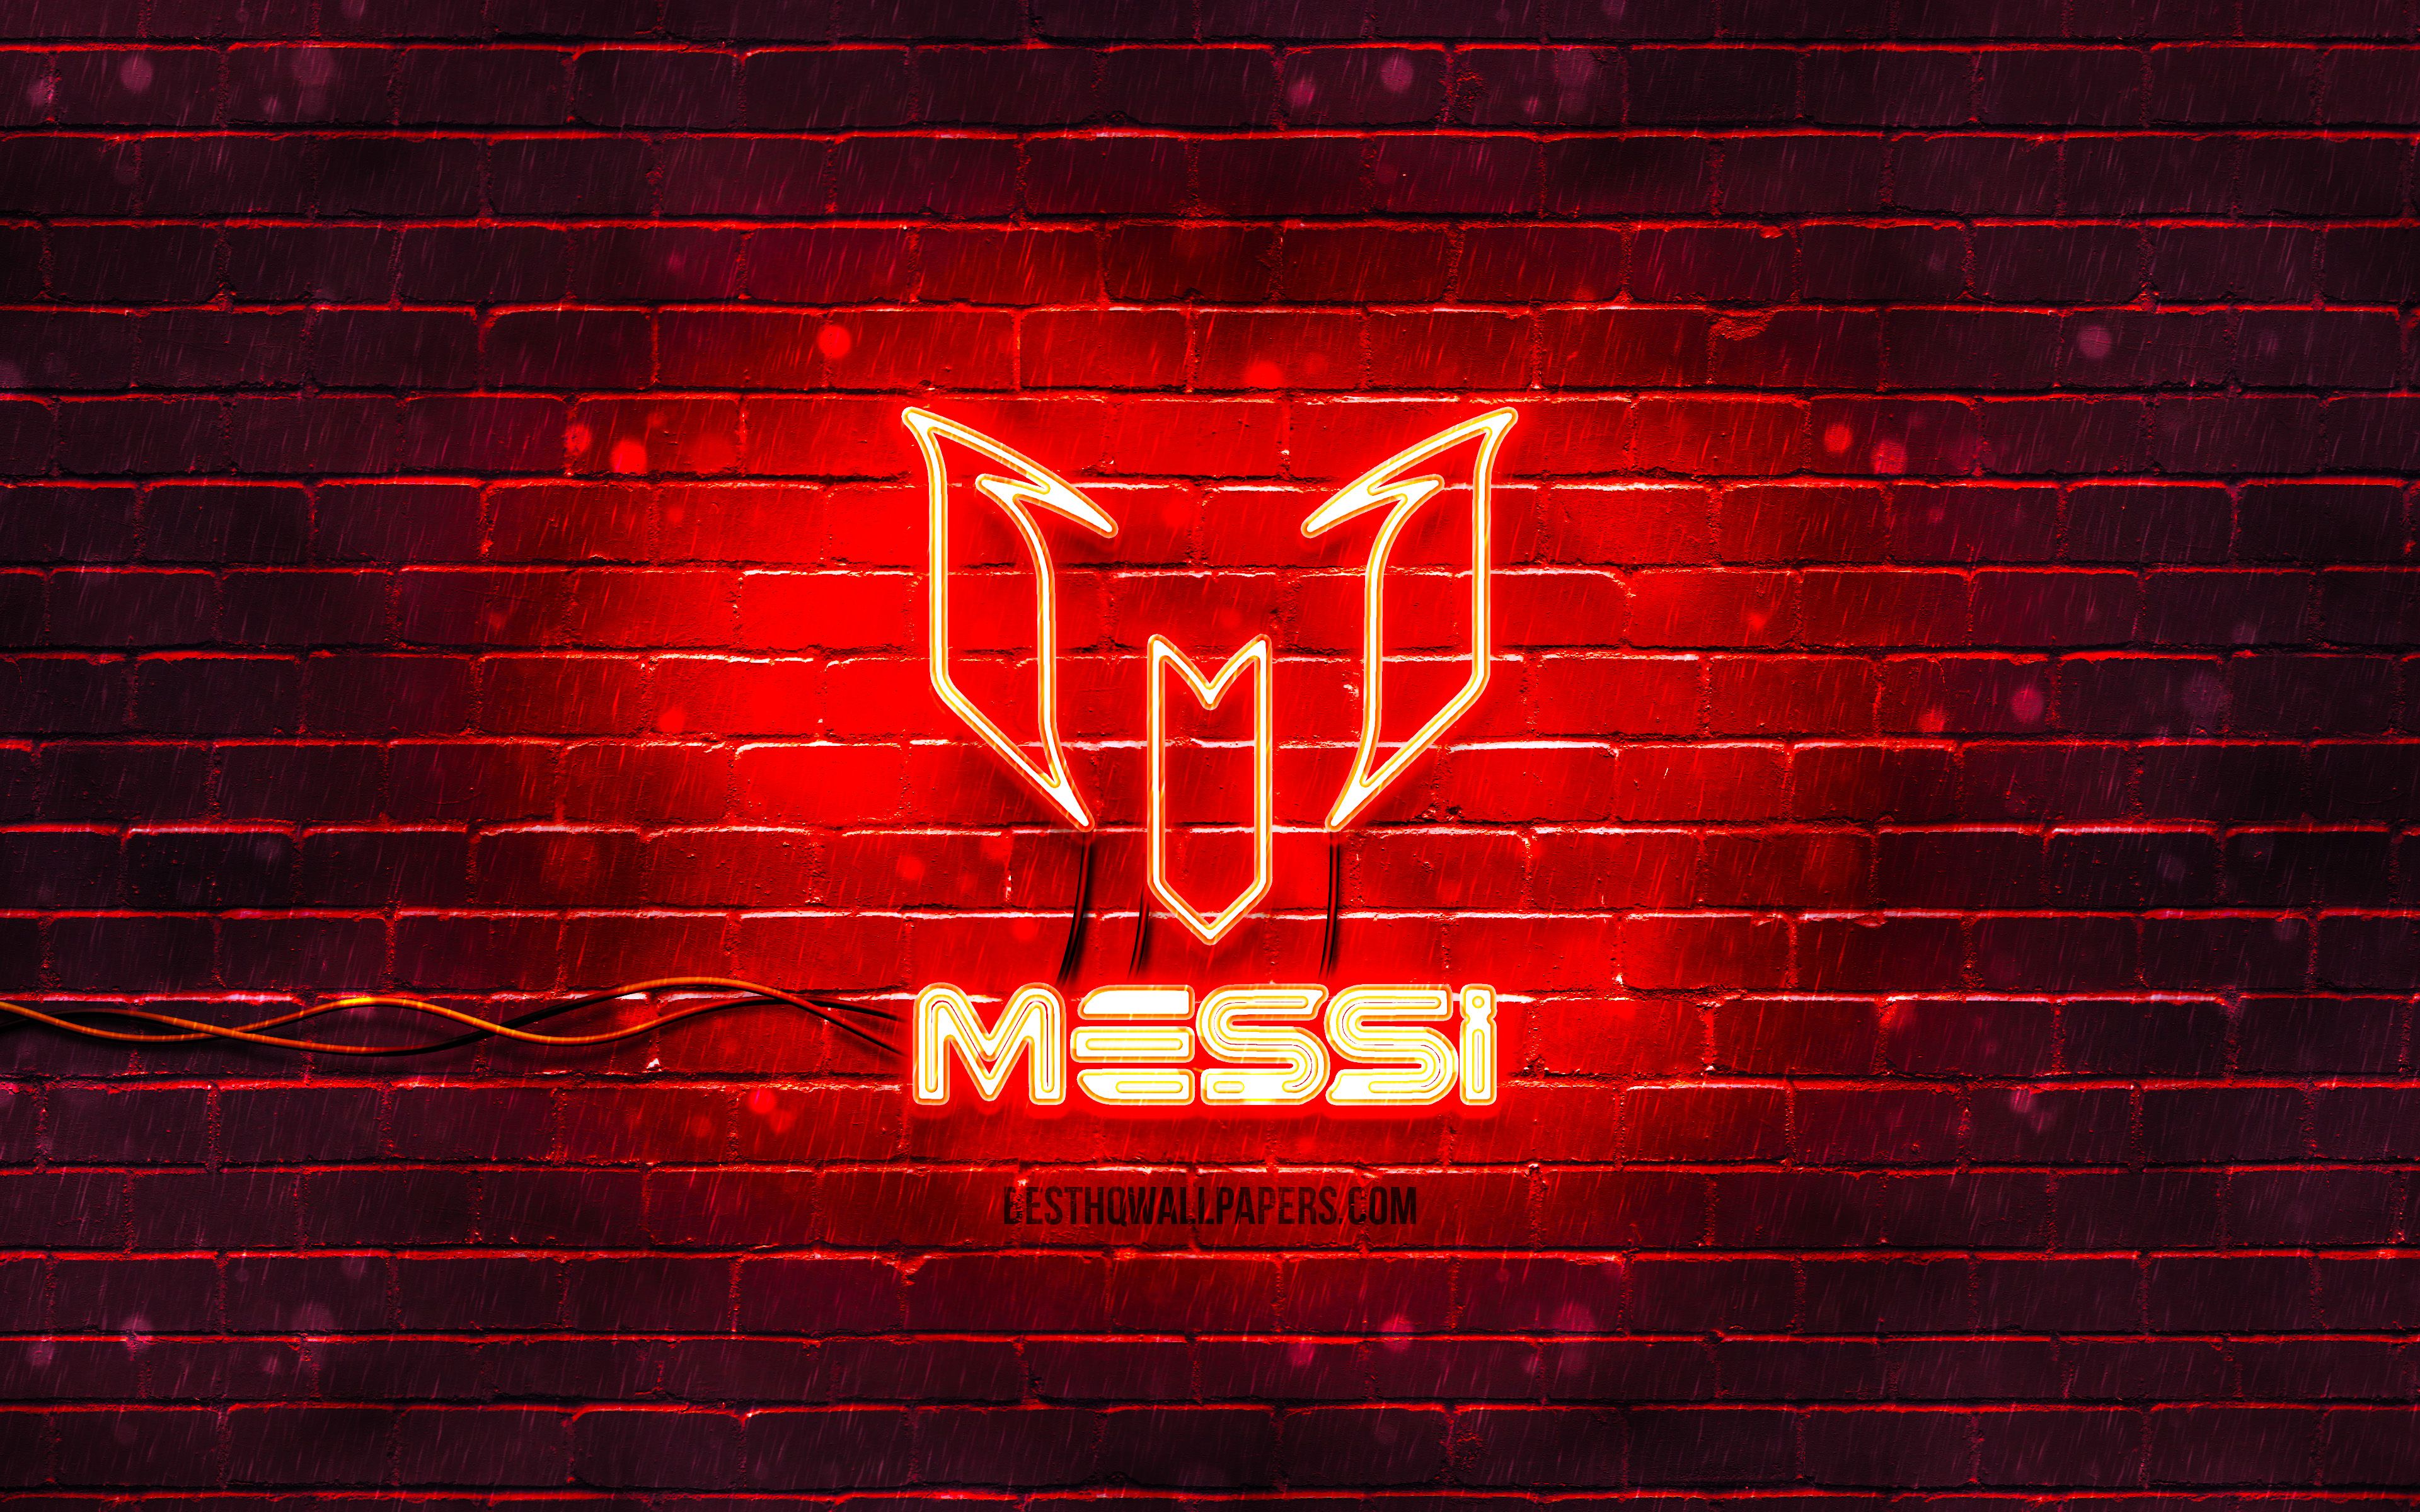 Download wallpaper Lionel Messi red logo, 4k, red brickwall, Leo Messi, fan art, Lionel Messi logo, football stars, Lionel Messi neon logo, Lionel Messi for desktop with resolution 3840x2400. High Quality HD